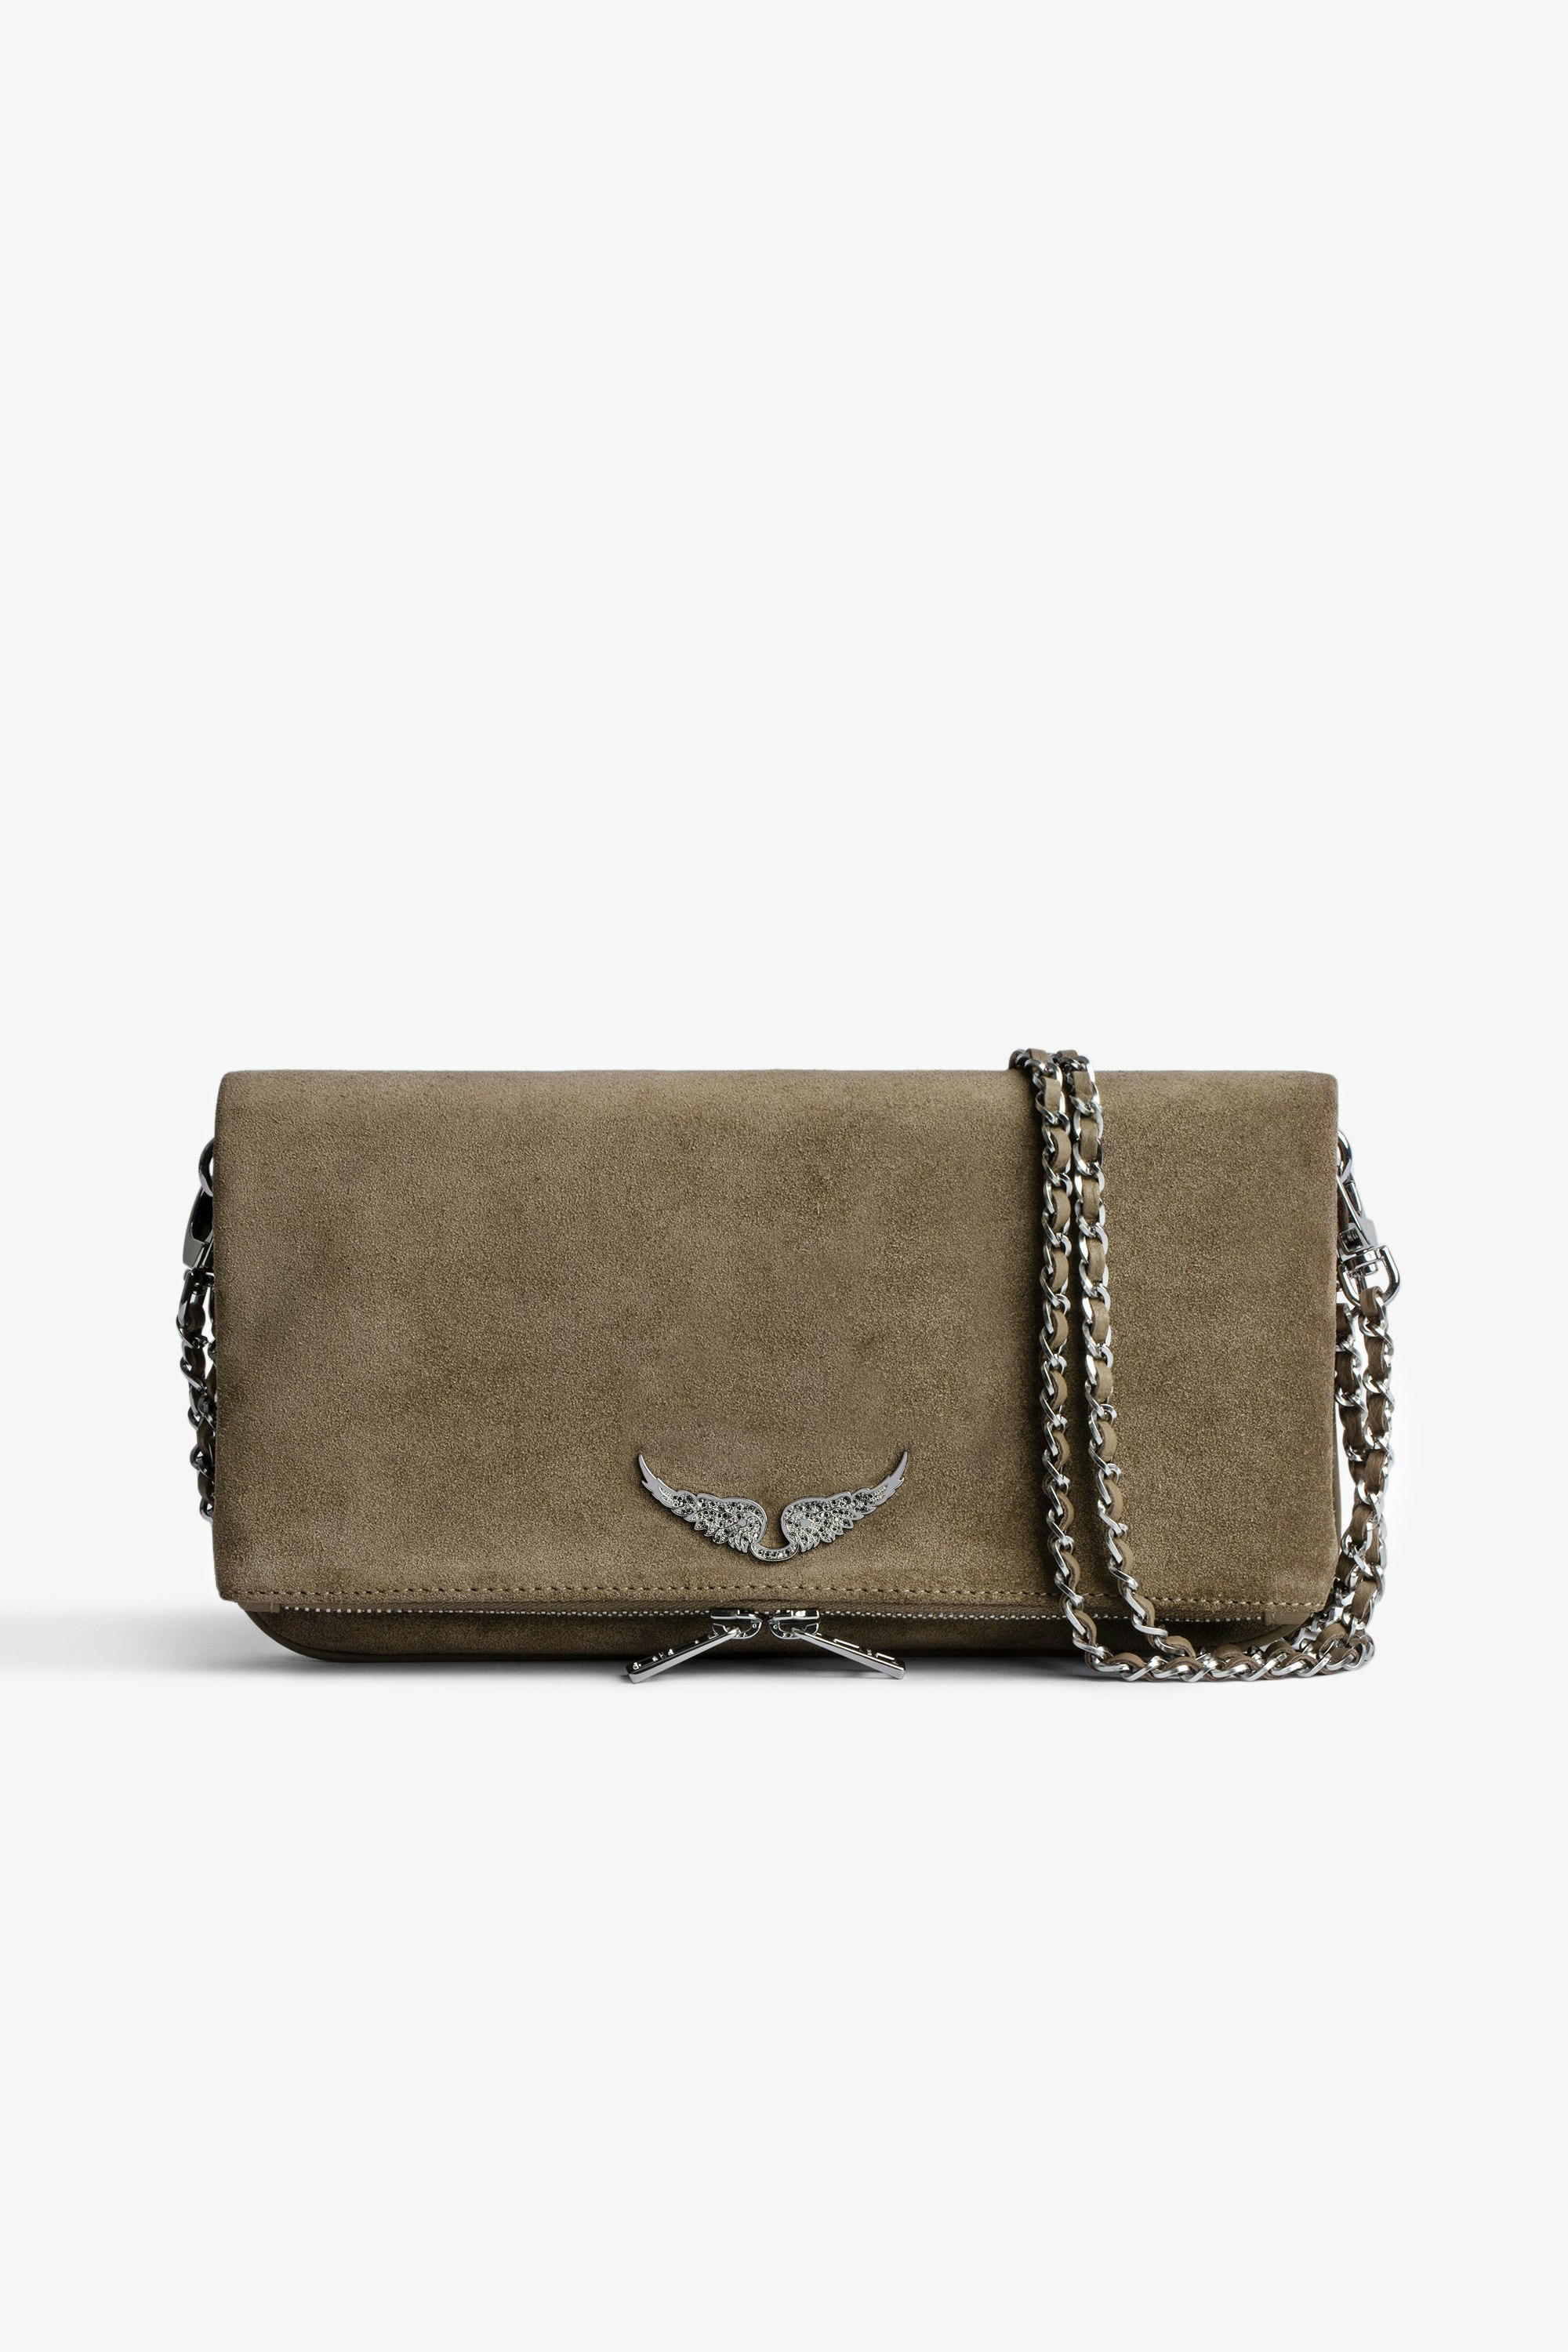 Rock Suede クラッチバッグ Women’s taupe suede clutch bag